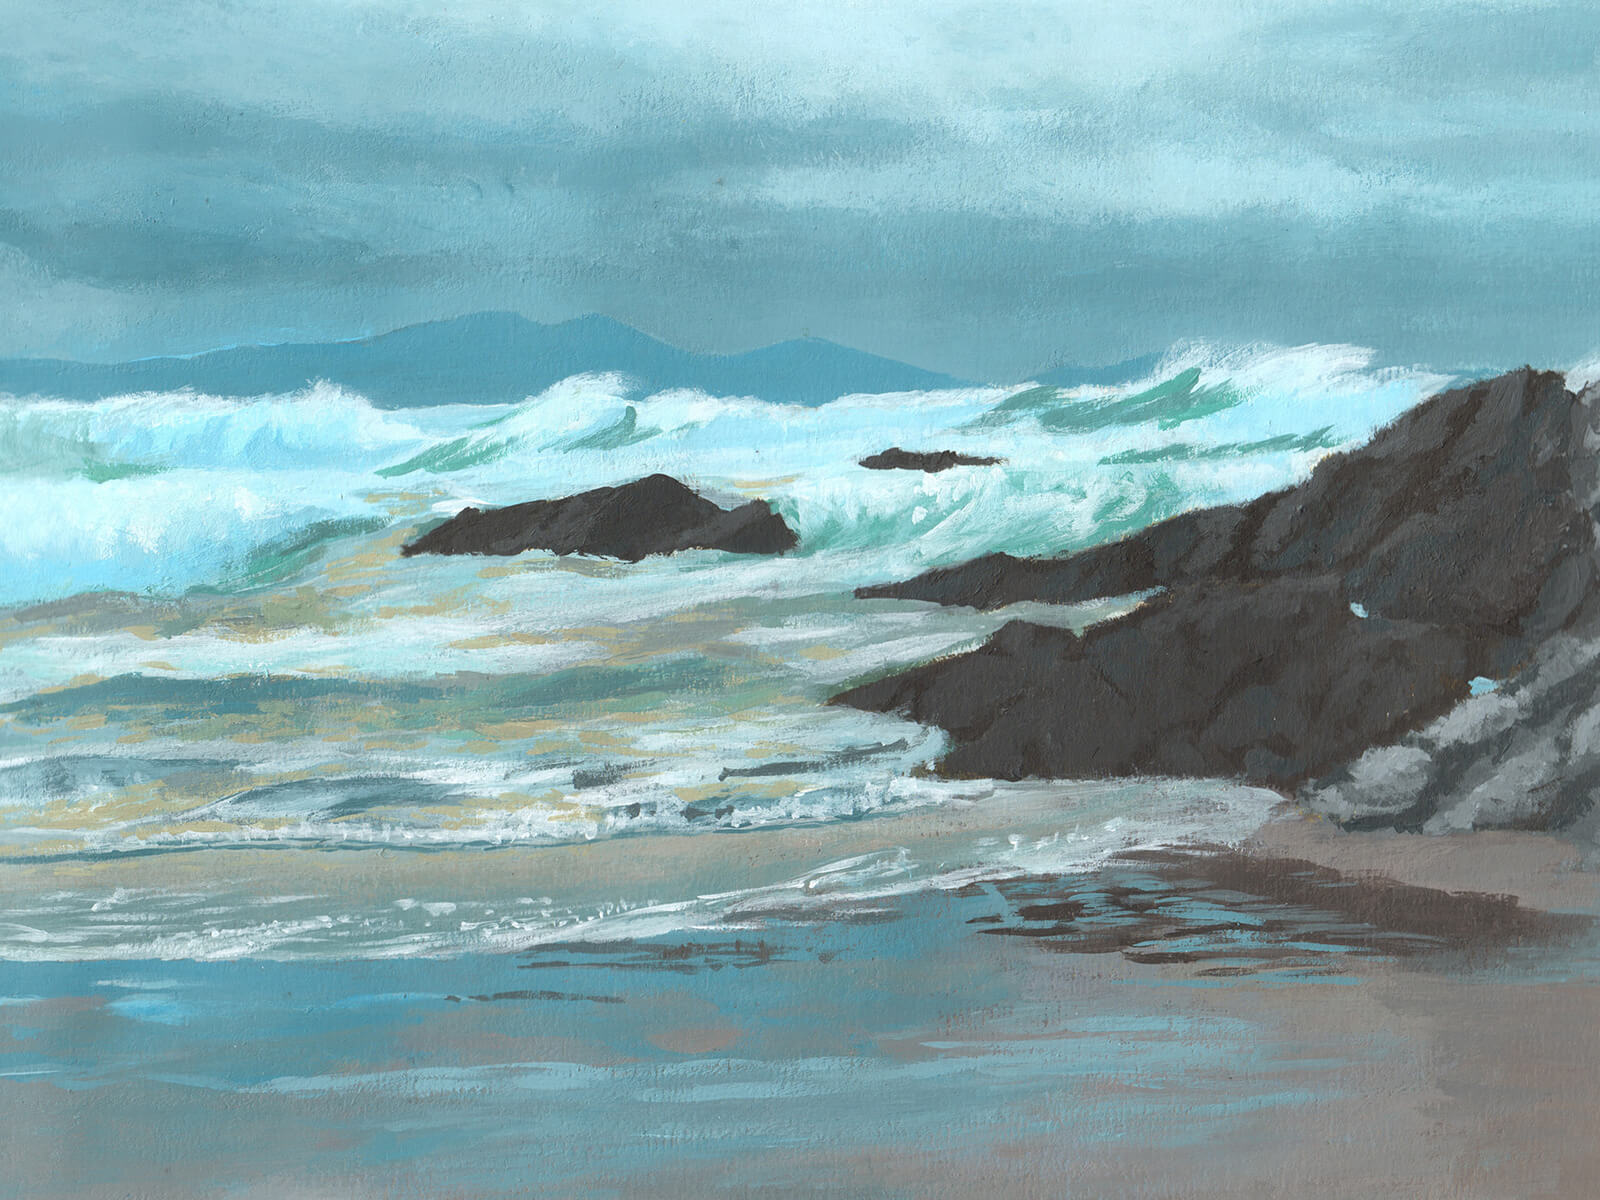 Landscape painting of an ocean shore with choppy white waves crashing against dark gray rocks against a dark cloudy sky.